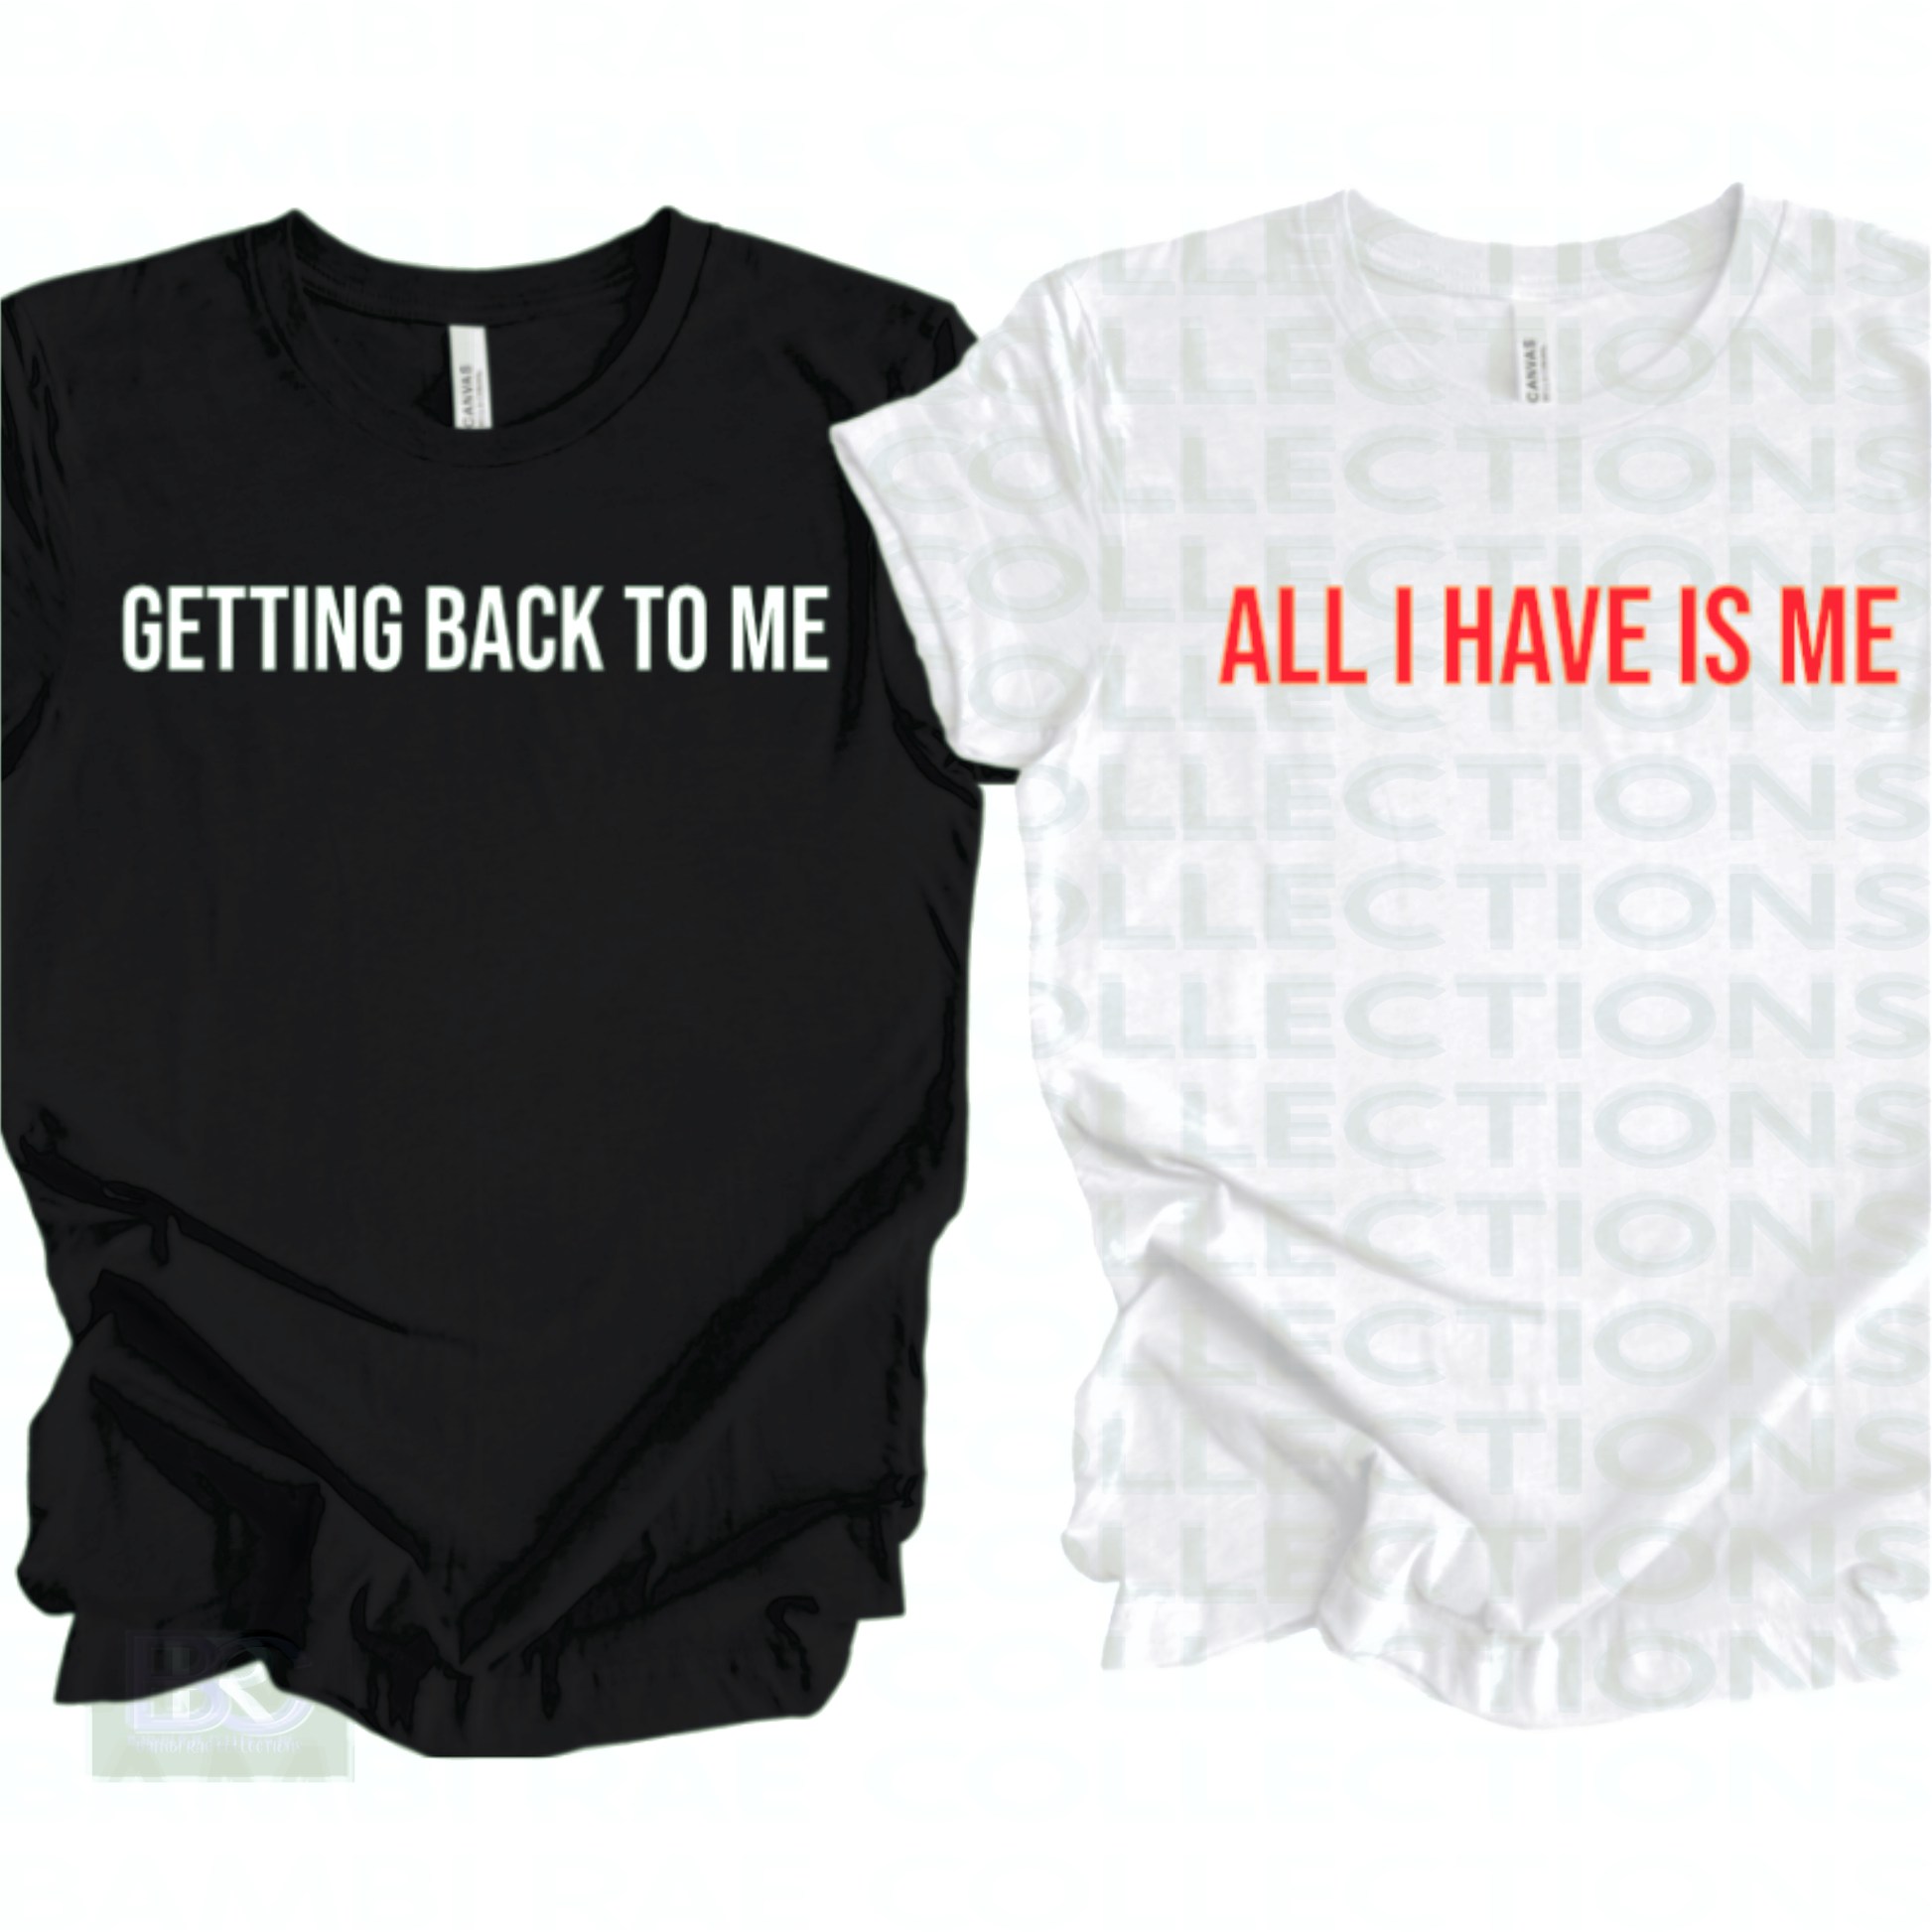 one black shirt with the words "getting back to me" in white lettering on it, and one white shirt with the words " all I have is me"  in red lettering on it